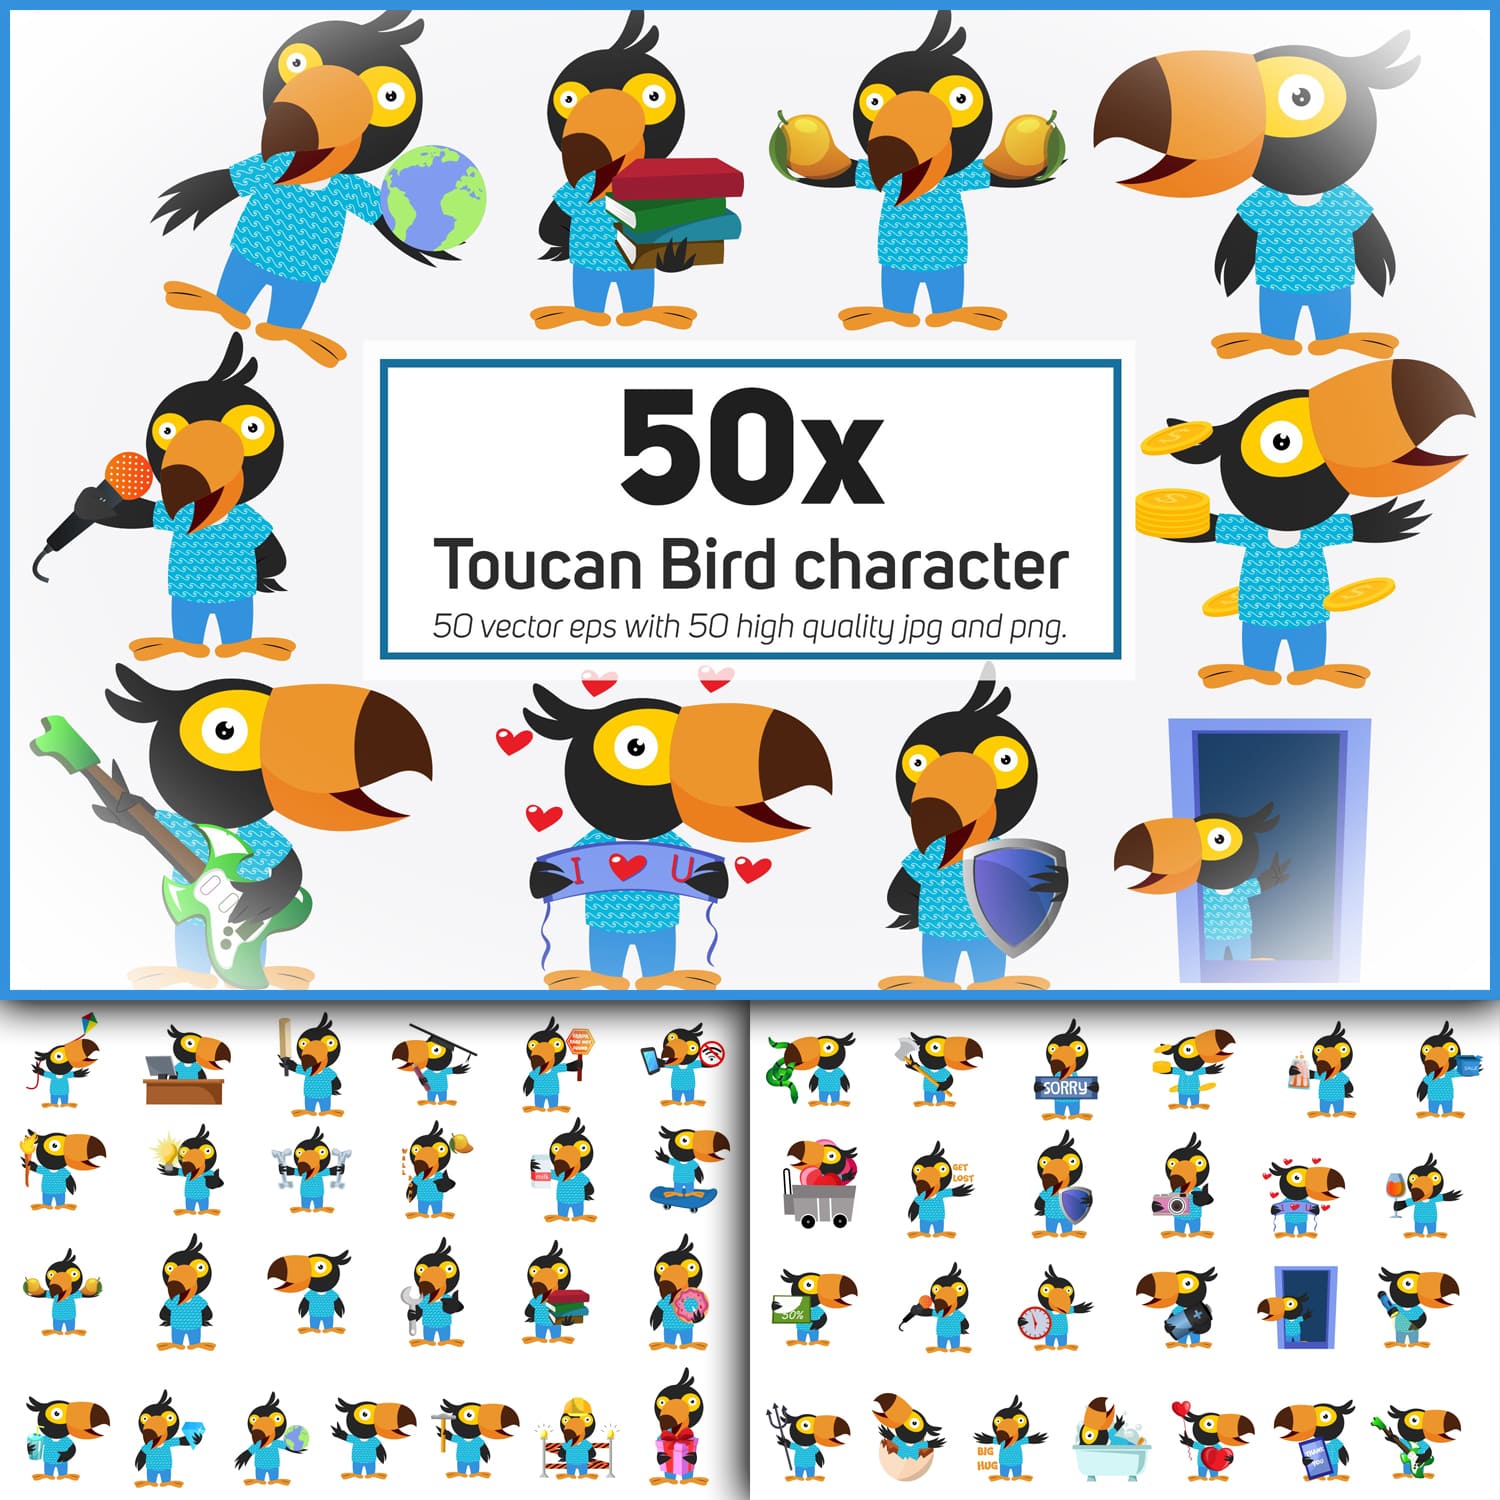 Prints of toucan bird character or sticker collection.